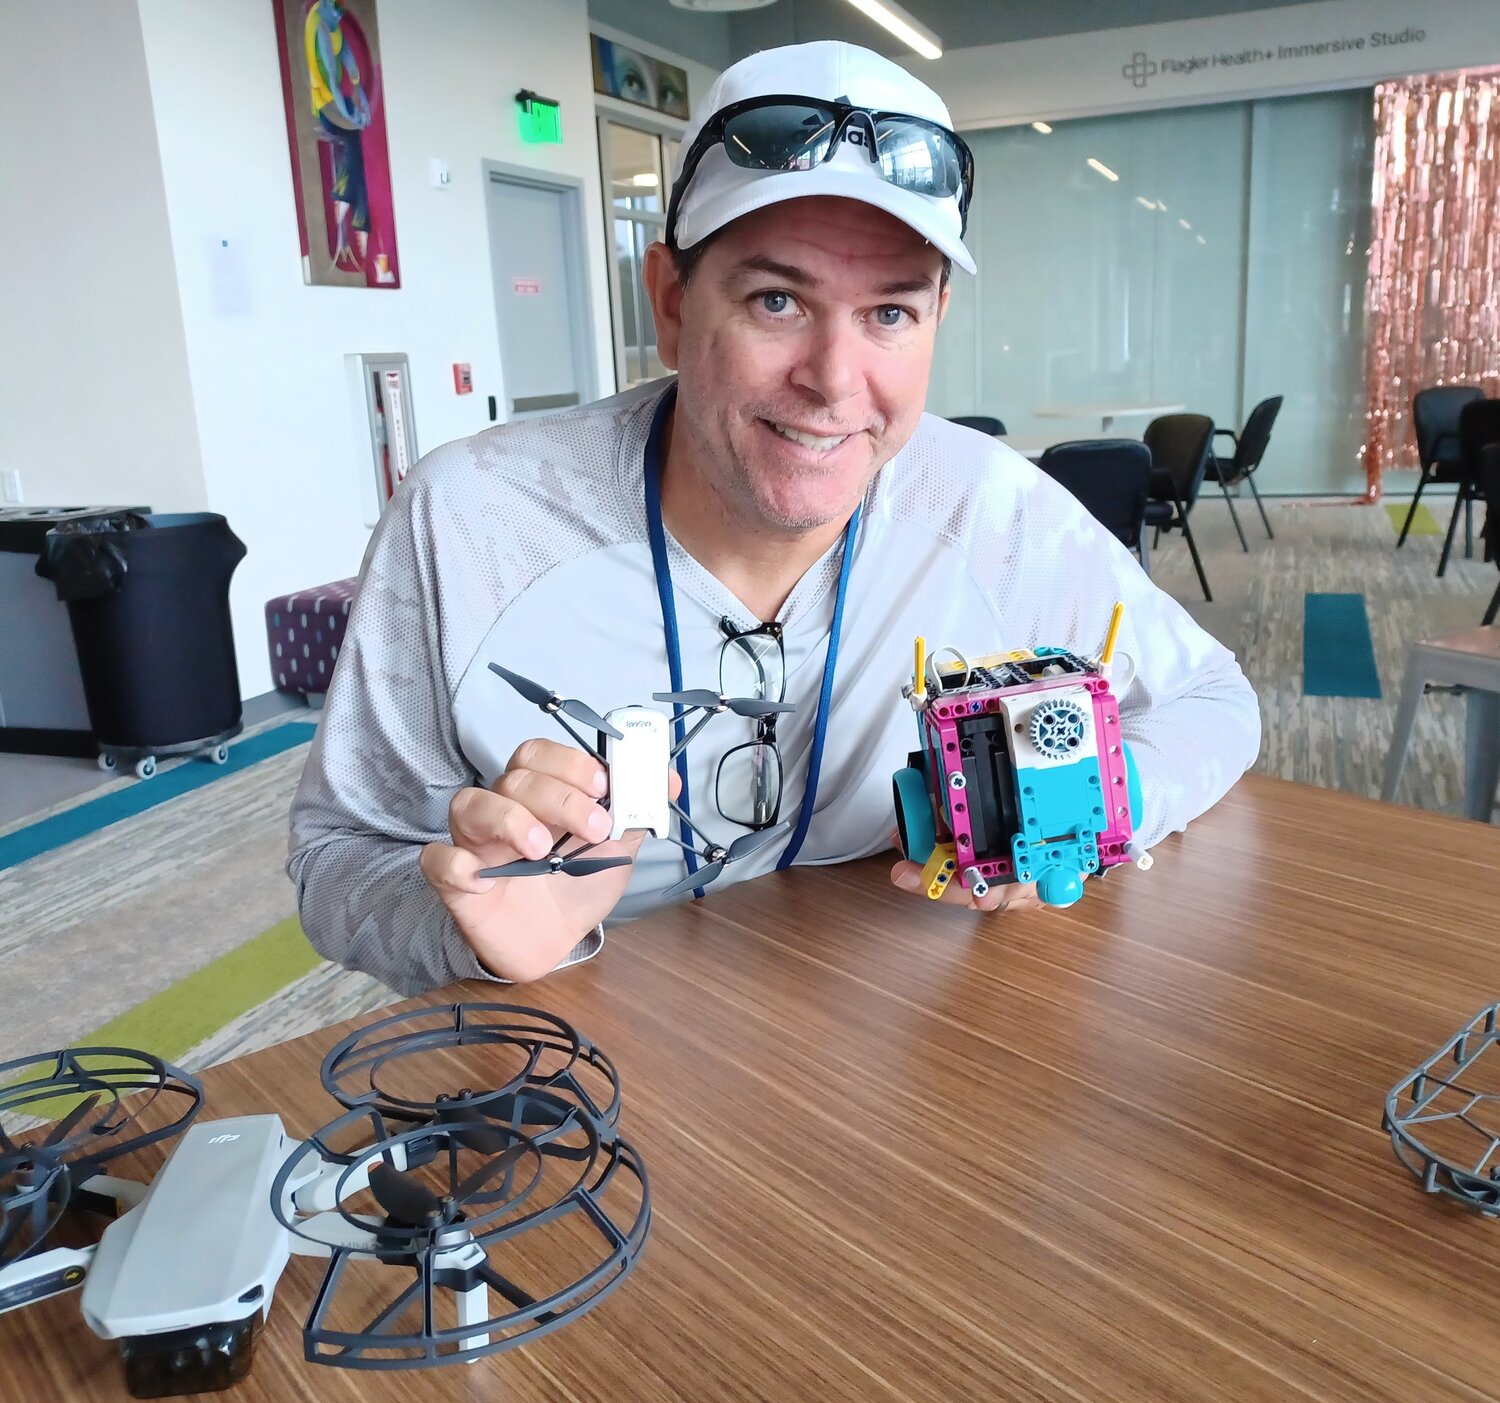 Instructor Ivan Ramirez is seen with some of the Tello drones used in his new classes at the link and a robot from the First LEGO League competition.